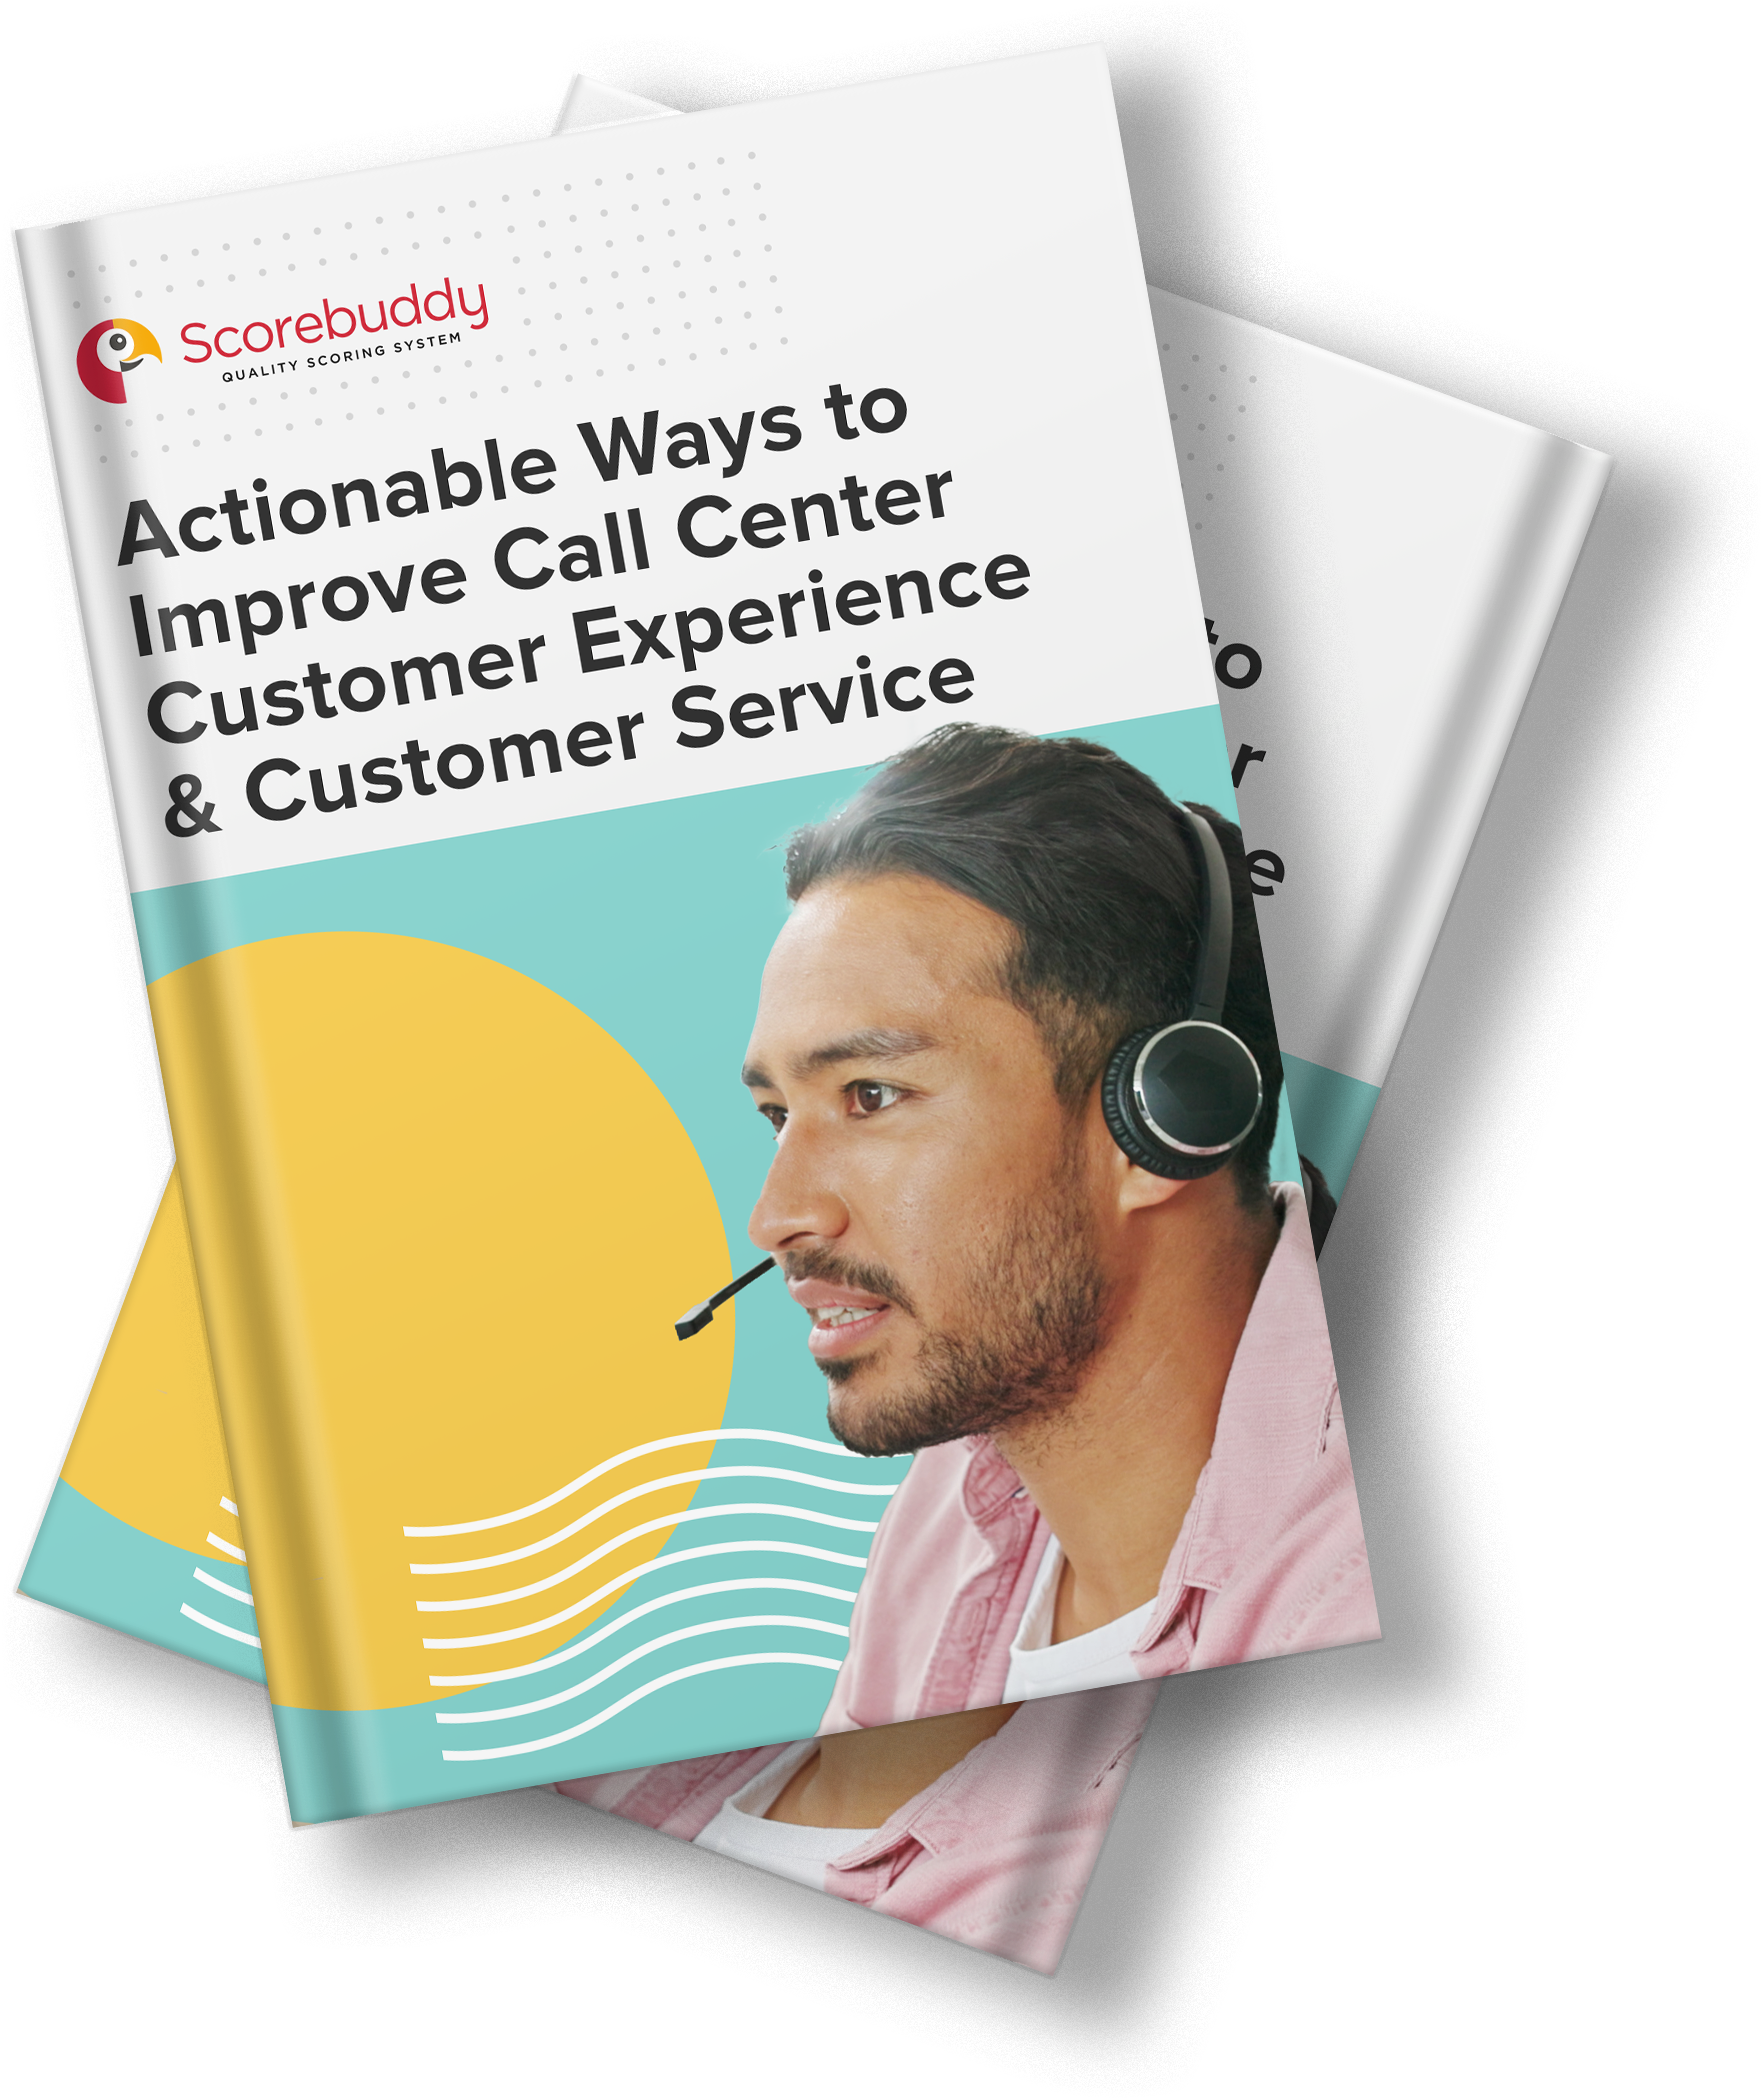 Cover-Mockup-for-Actionable-Ways-to-Improve-Call-Center-Customer-Experience-&-Customer-Service